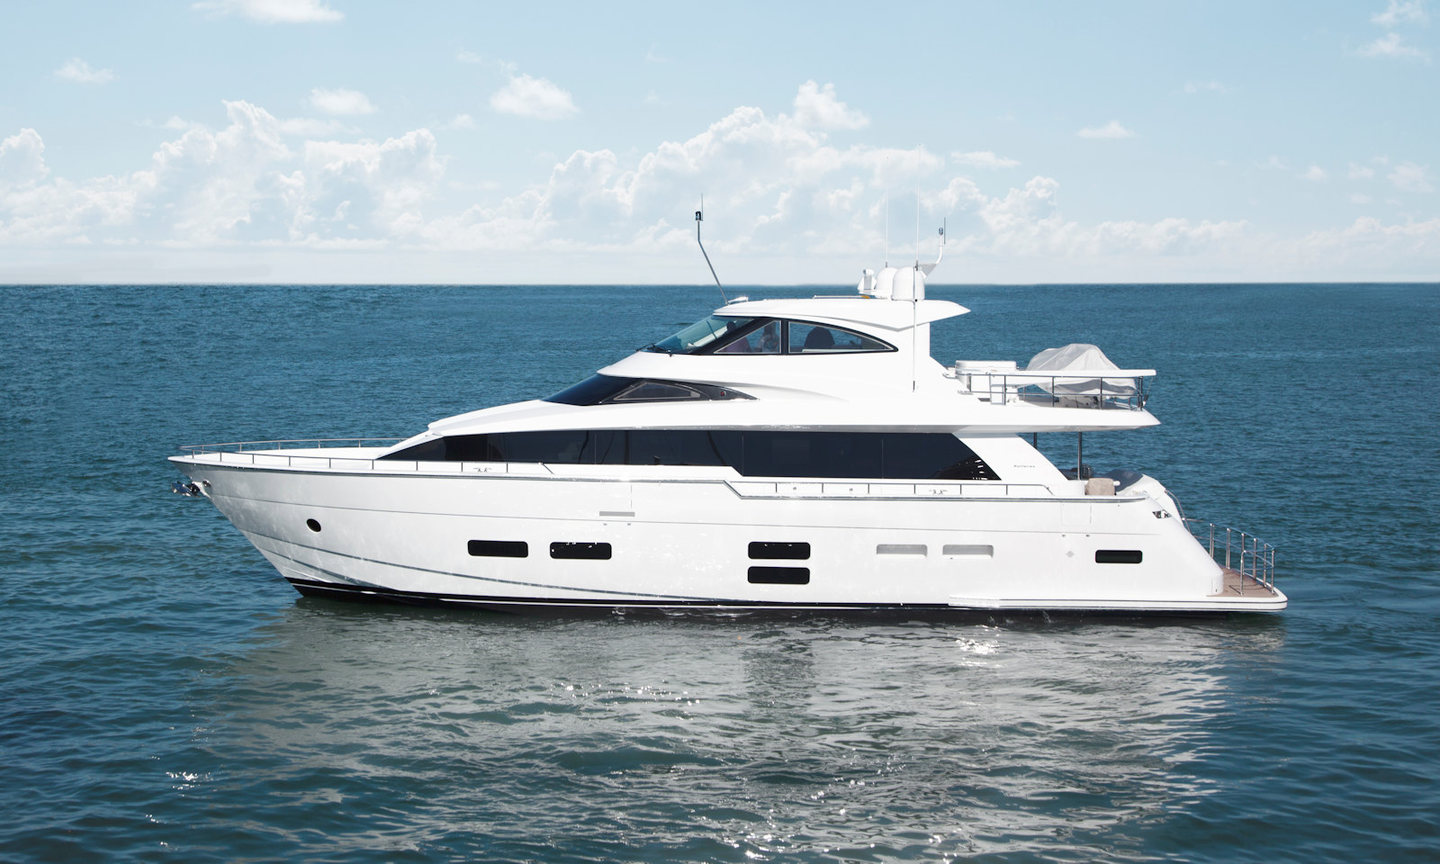 360 VR Virtual Tours of the Hatteras 70 Motor Yacht